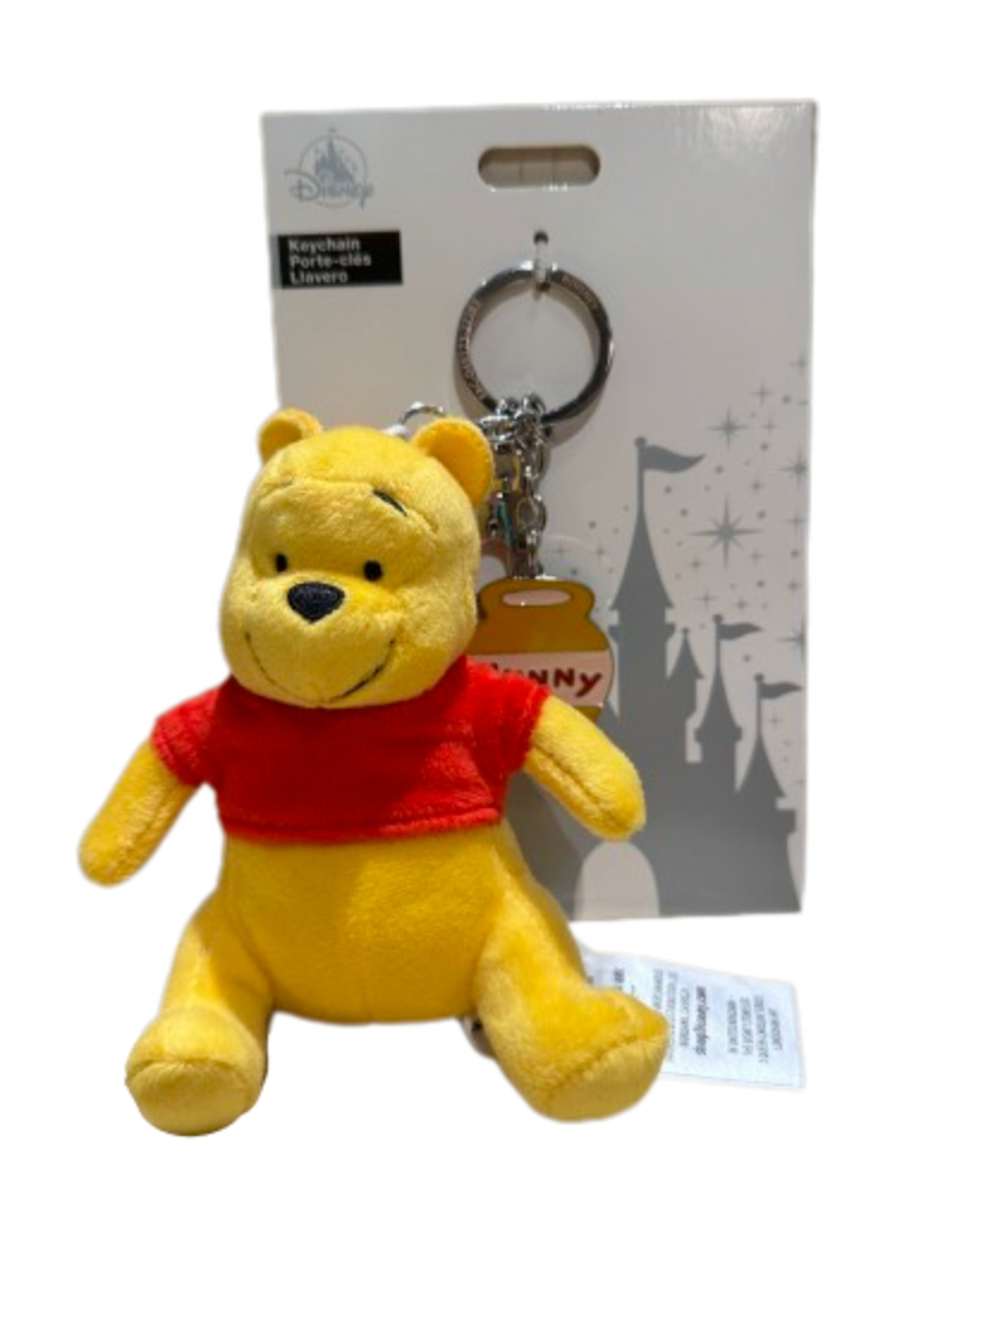 Disney Parks Winnie The Pooh Plush Keychain with Hunny Charm New with Tag